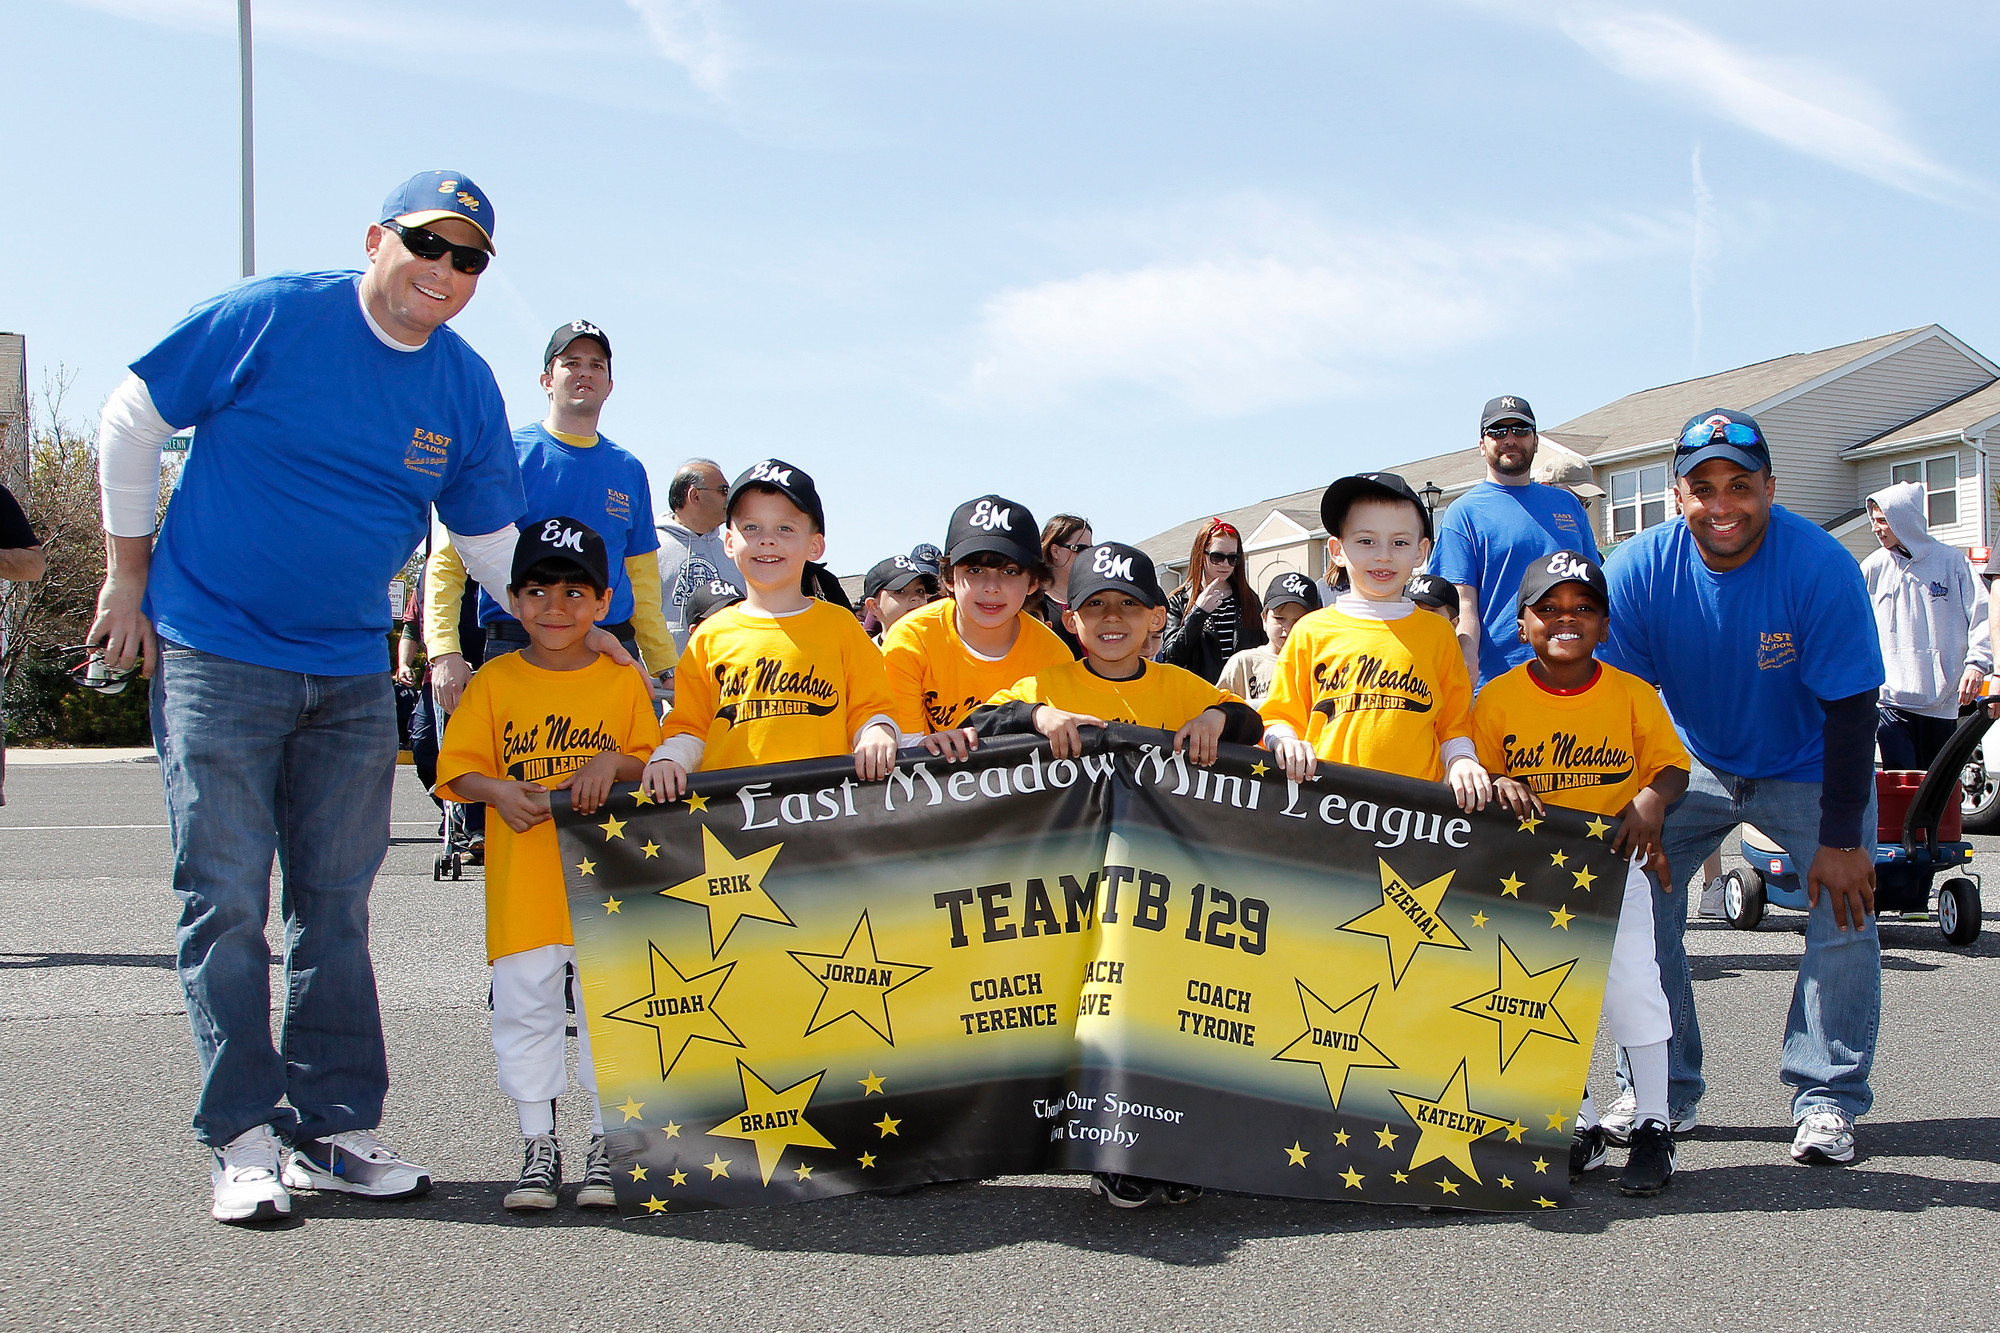 The East Meadow Tee Ball Team No. 129 marched the parade with their coaches.